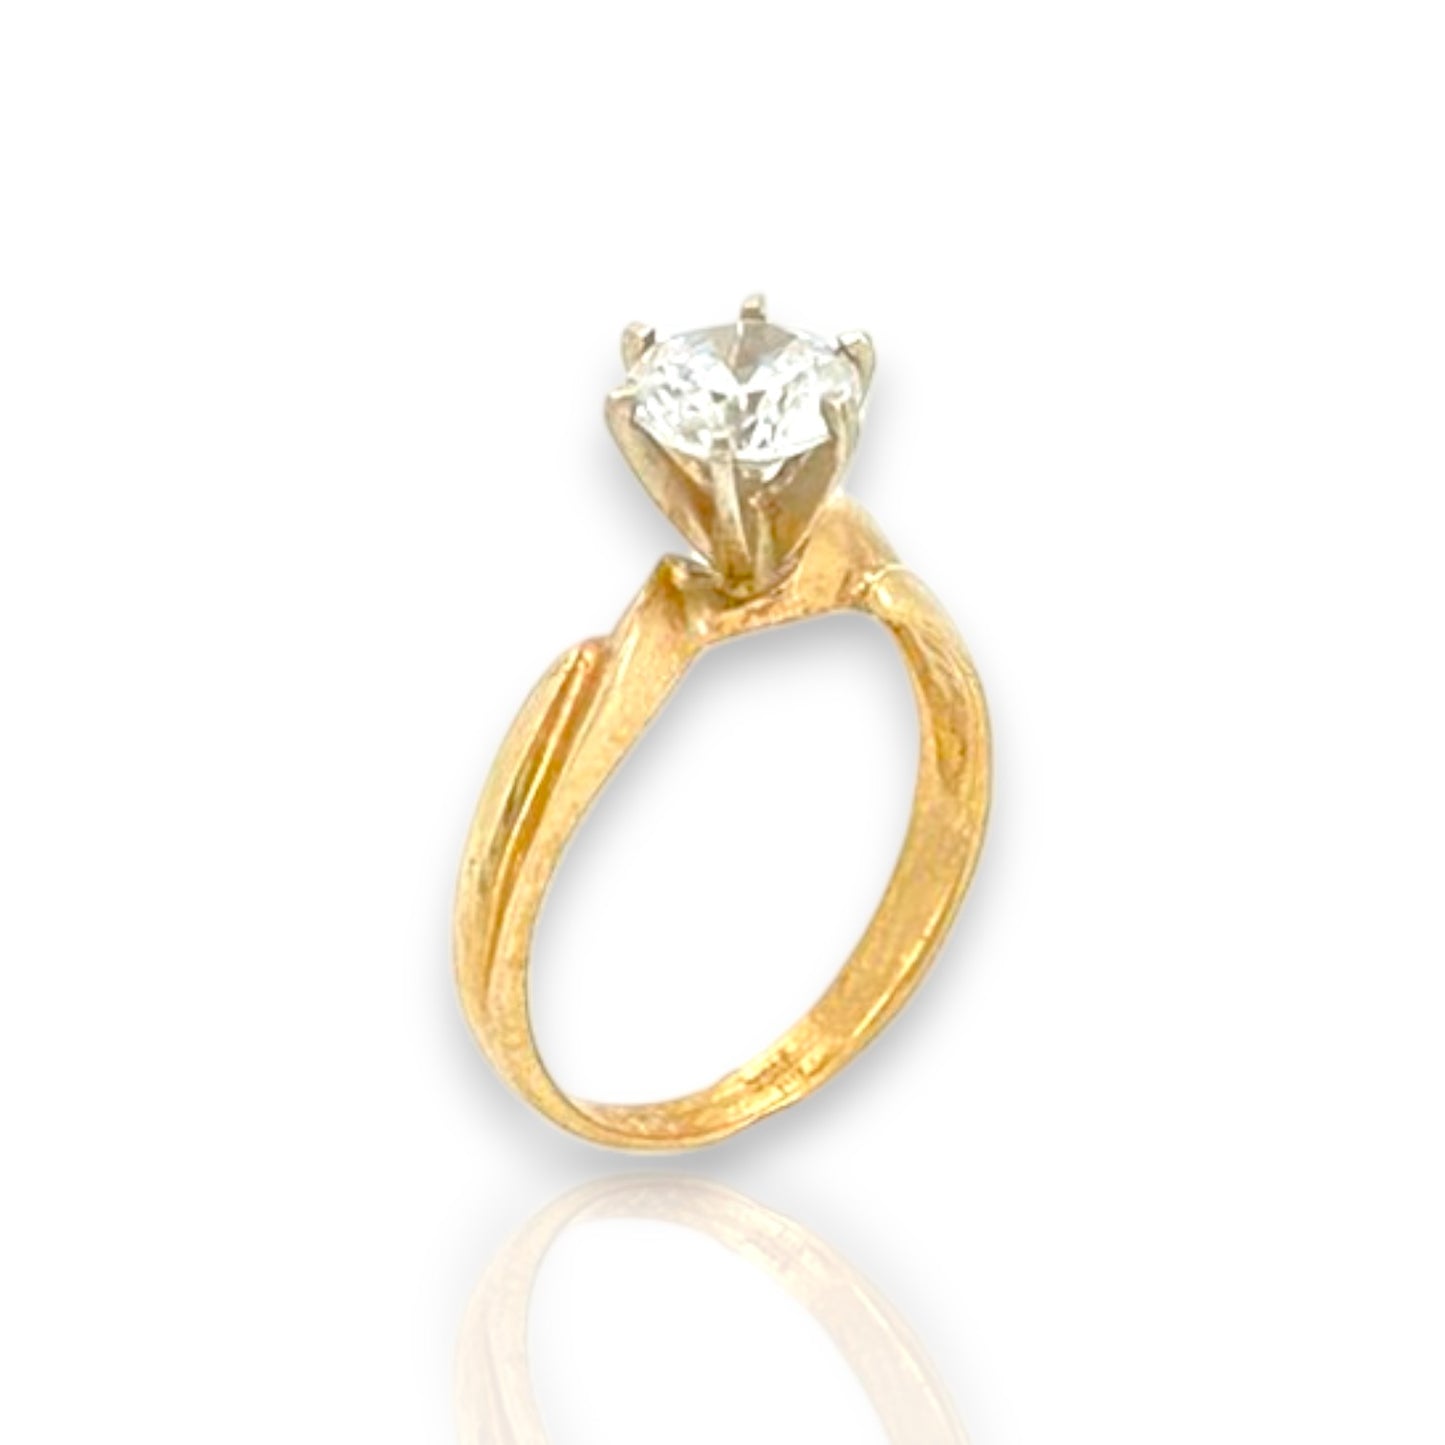 Round Cut Center Stone Engagement Ring - 10k Yellow Gold